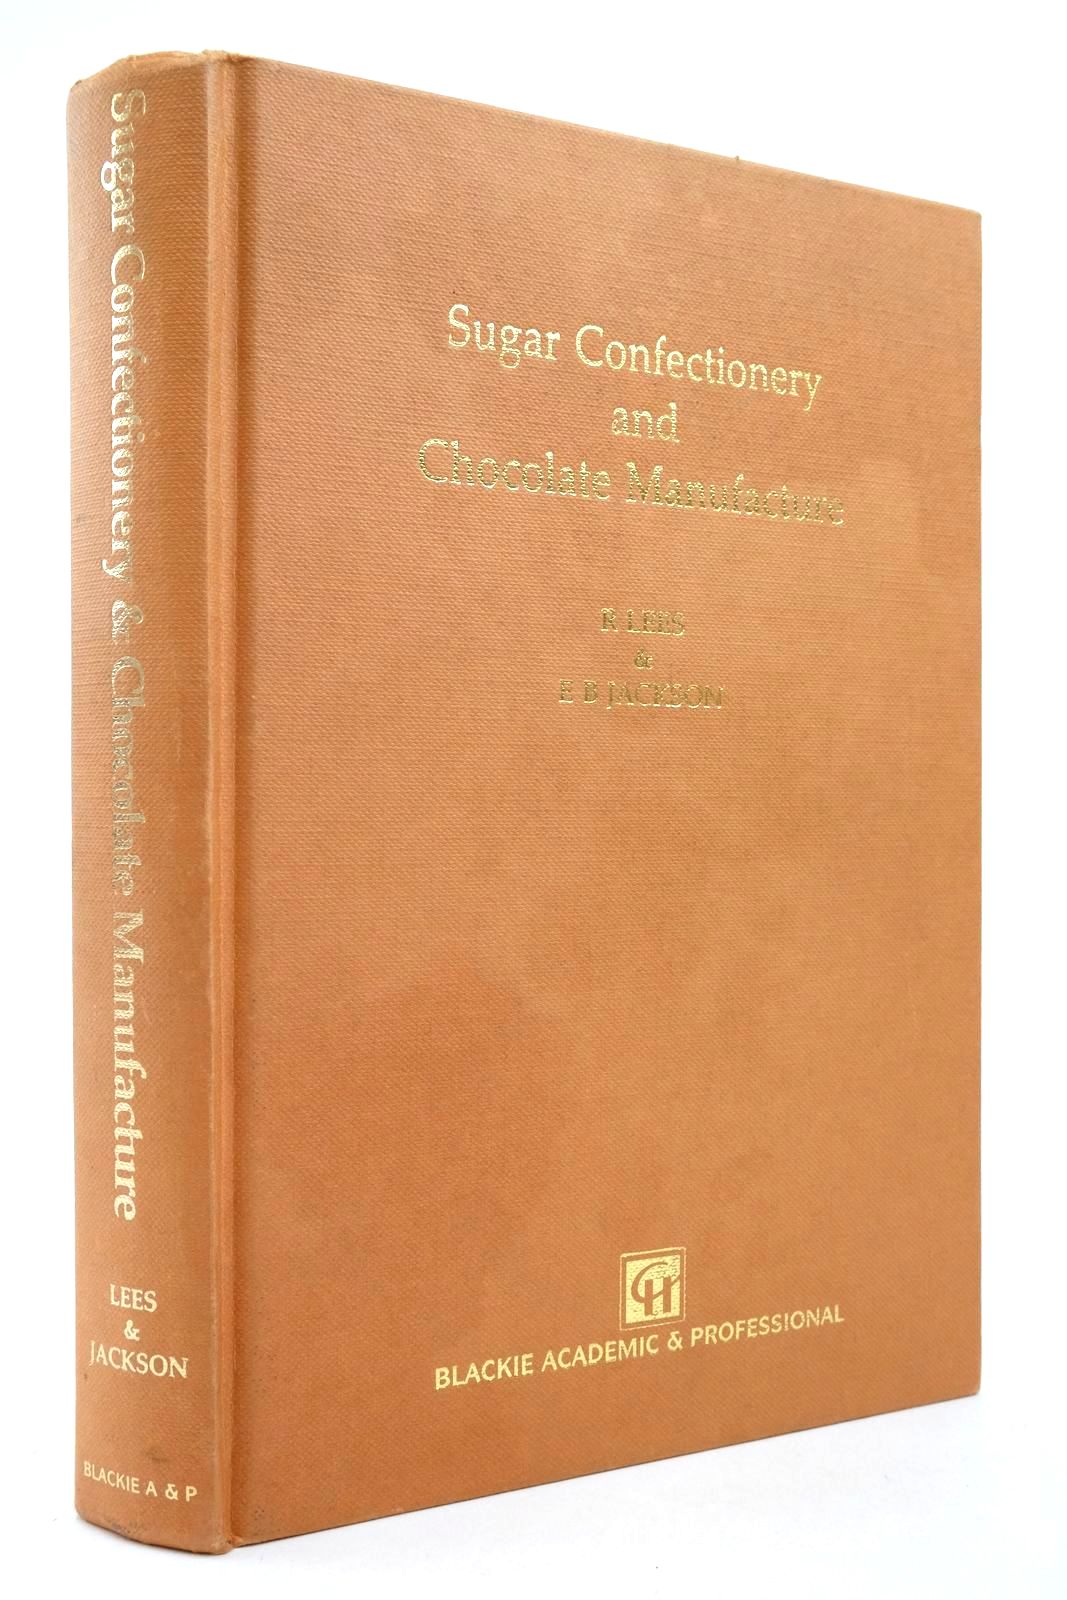 Photo of SUGAR CONFECTIONARY AND CHOCOLATE MANUFACTURE written by Lees, R. Jackson, E.B. published by Blackie Academic &amp; Professional (STOCK CODE: 2136826)  for sale by Stella & Rose's Books